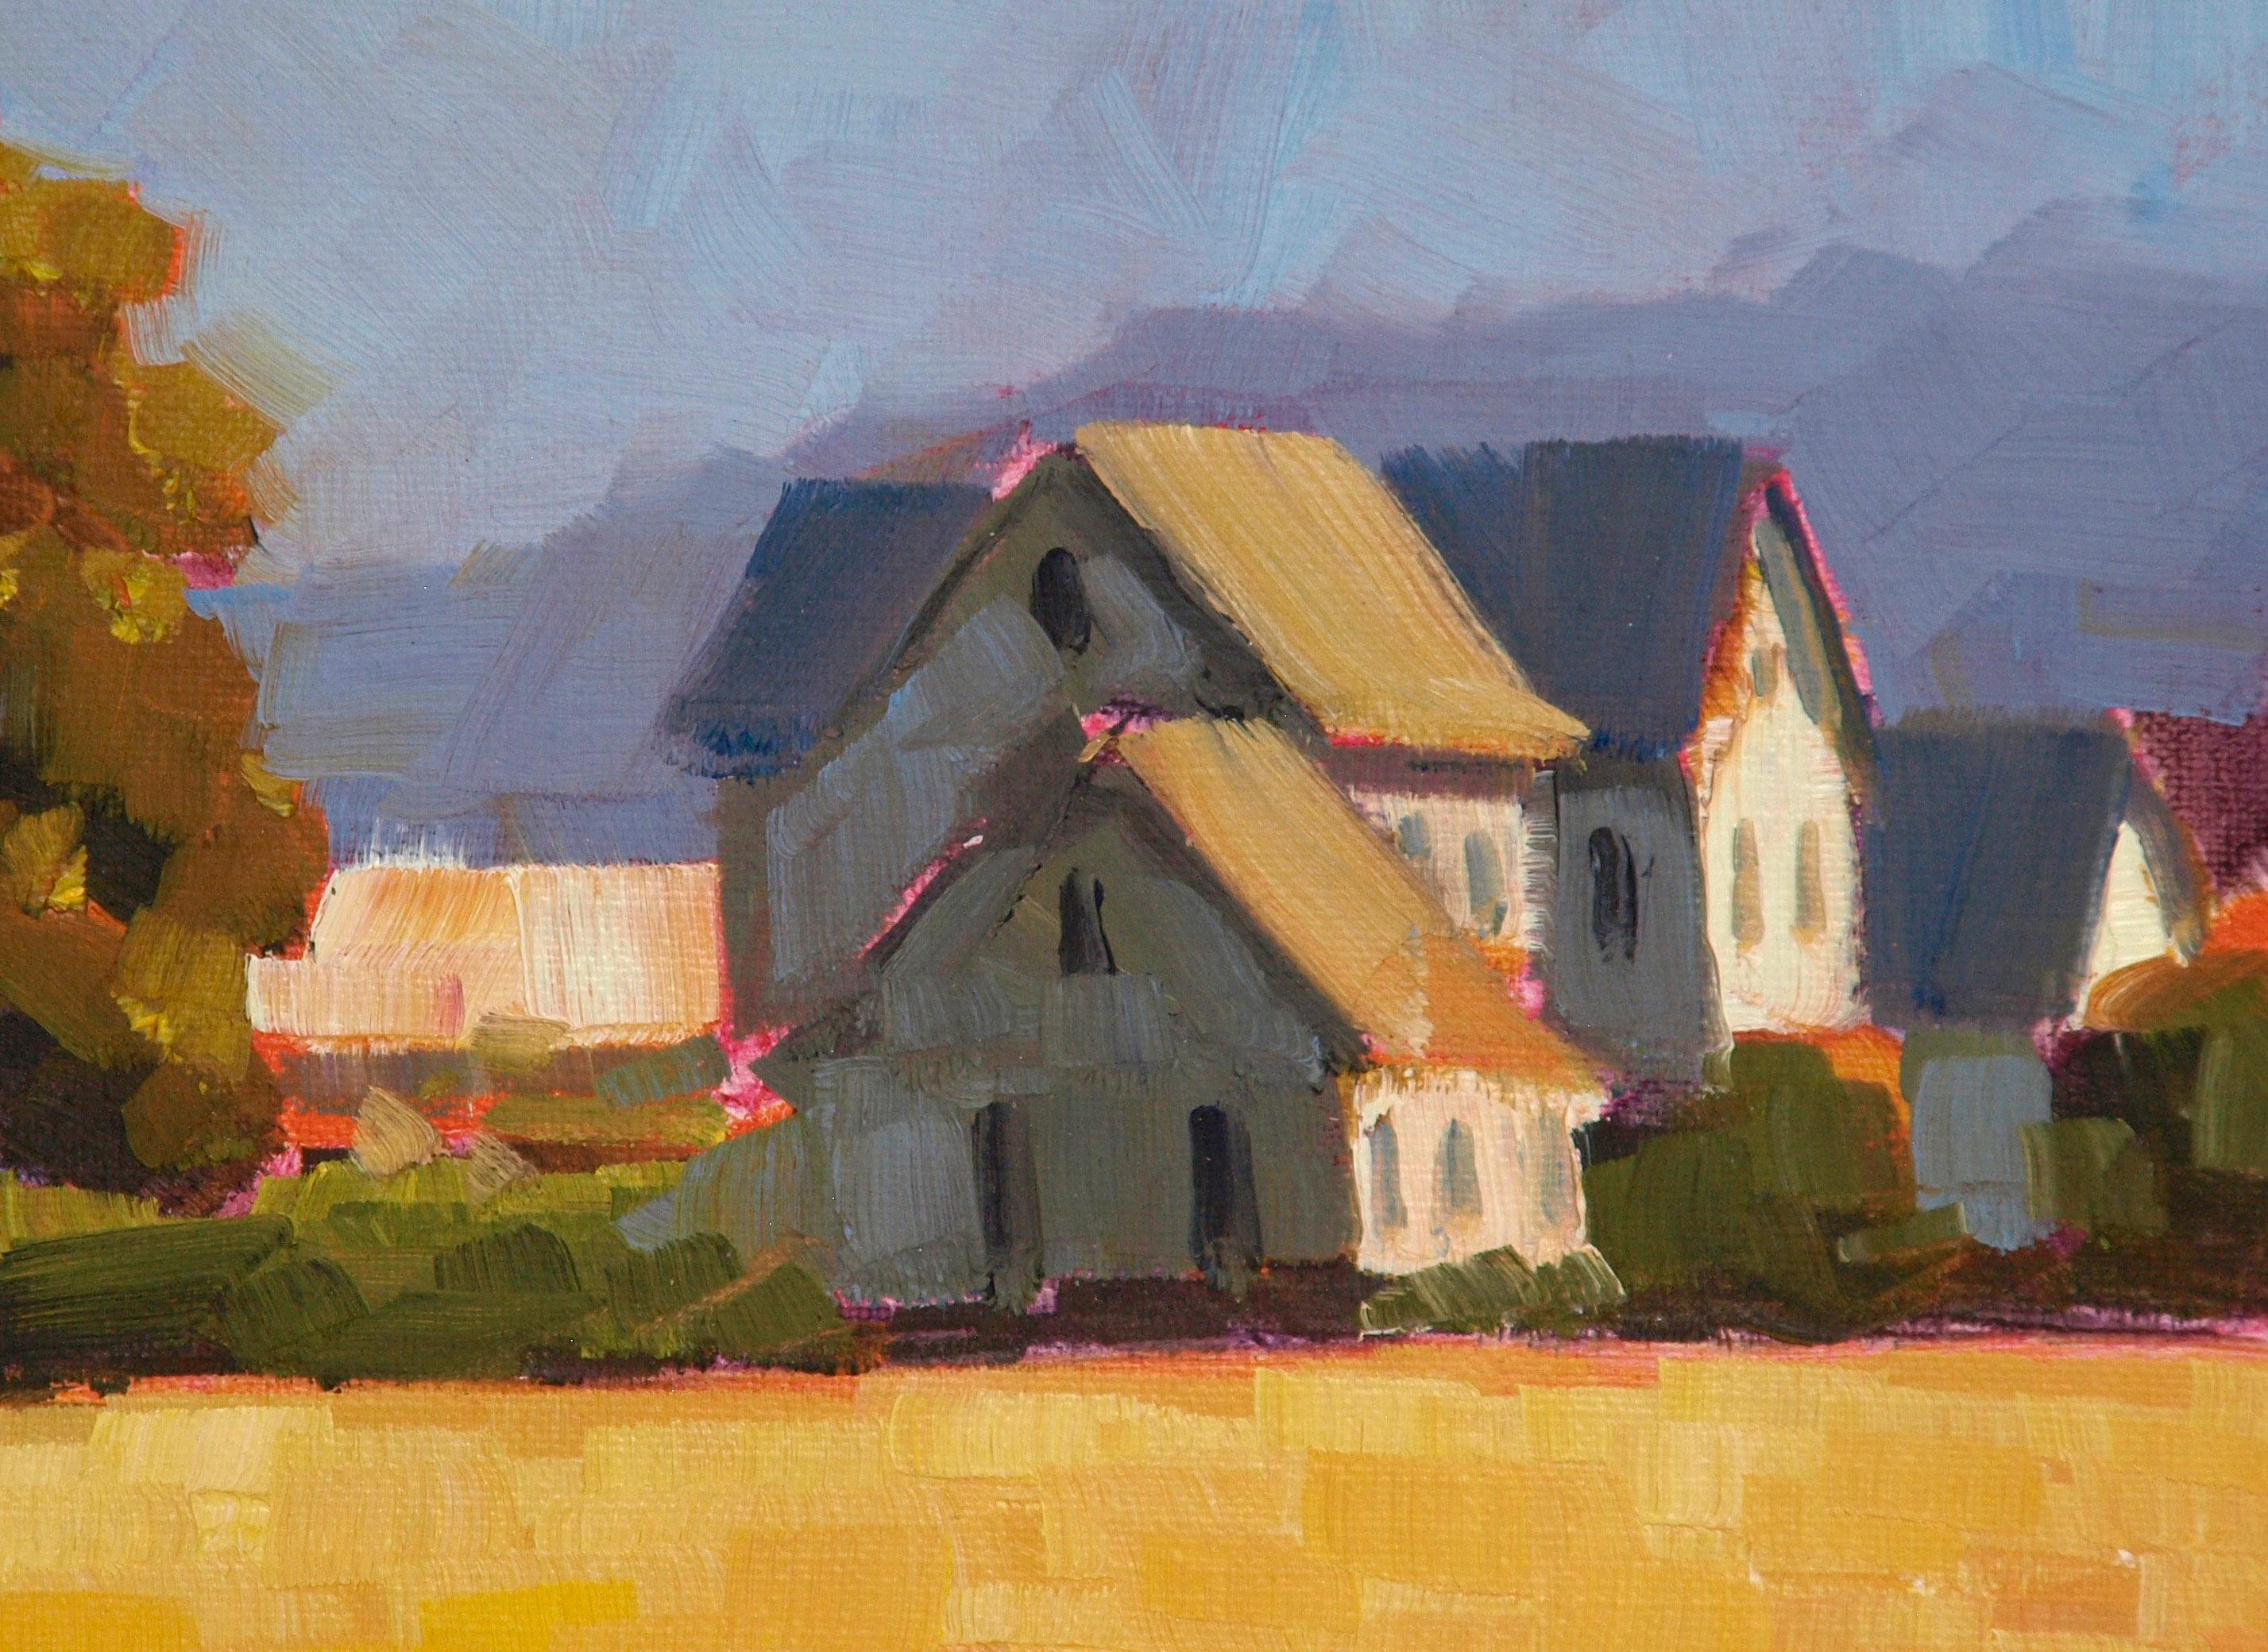 <p>Artist Comments<br />I like the geometric shapes in the farm house, which looks like it may have been added onto and evolved over the years.  The setting with its trees and mountains only made it that much more compelling to paint.</p><br